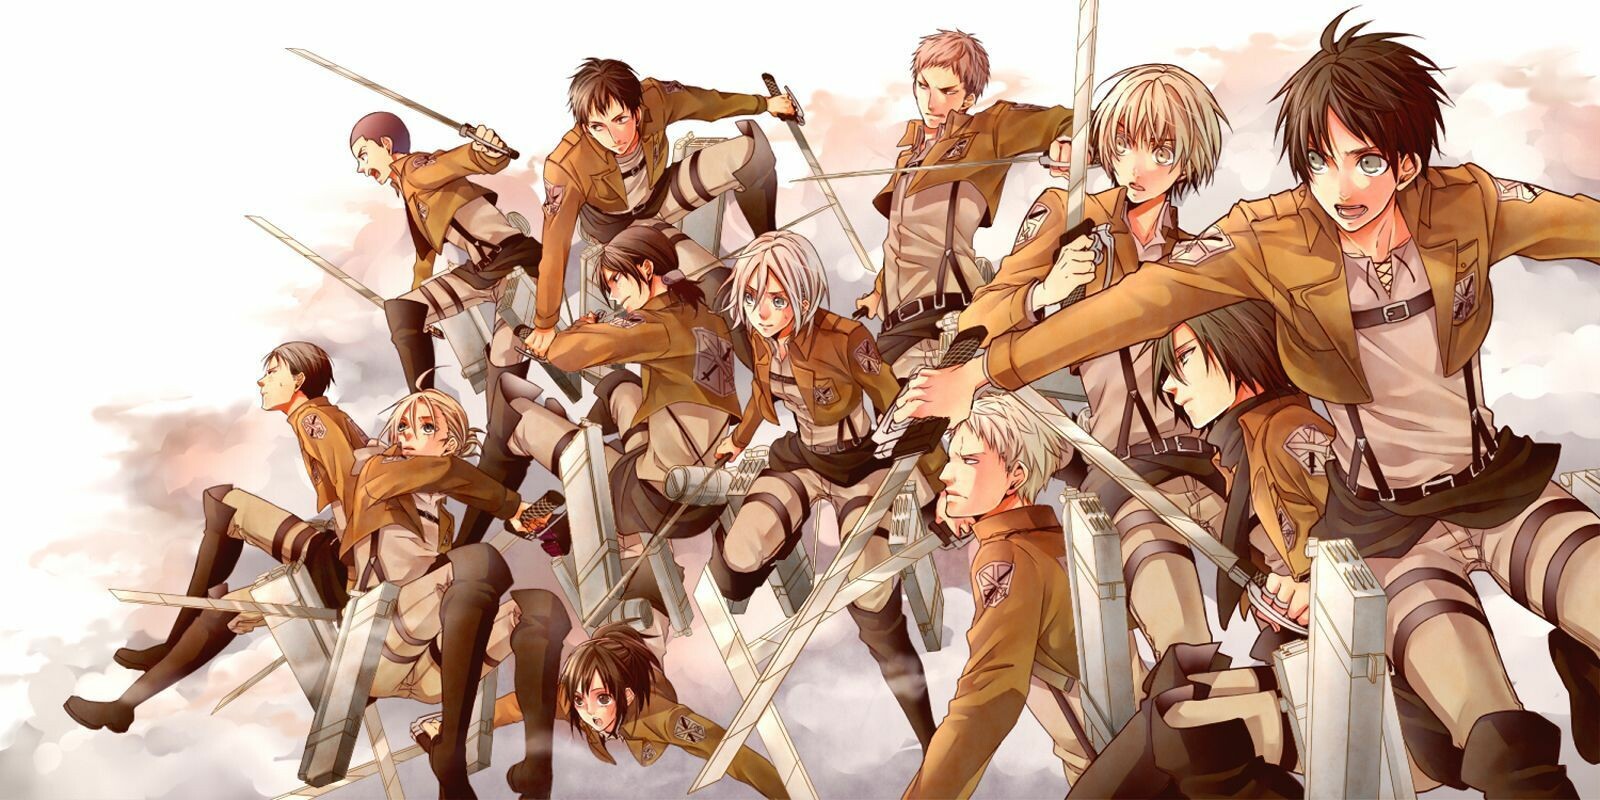 Levi Attack on Titan 4K iPhone Wallpapers Free Download